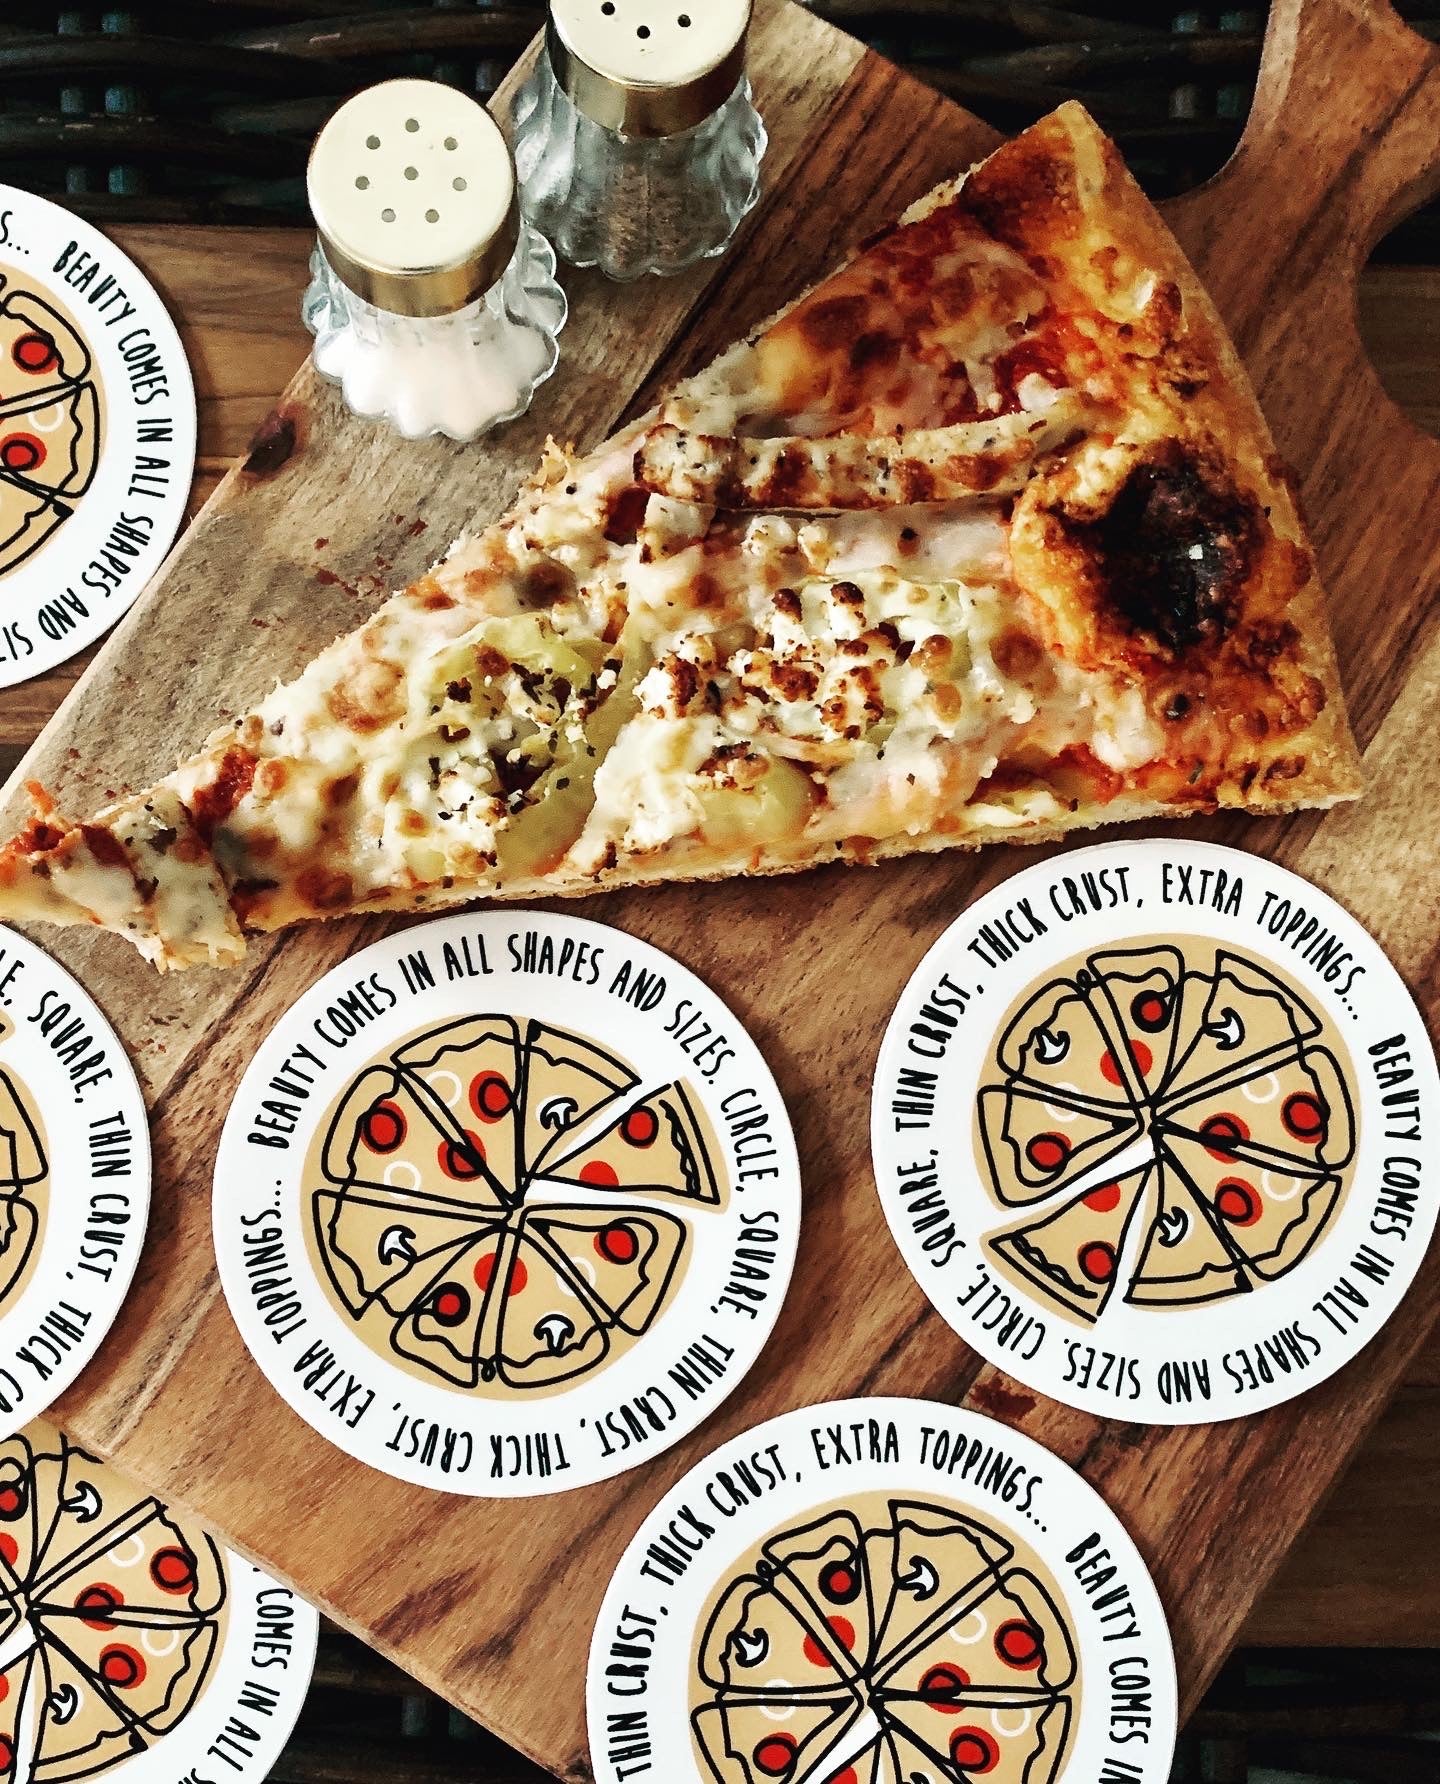 Beauty comes in all shapes and sizes. Circle, square, thin crust, thick crust, extra toppings.. vinyl stickers